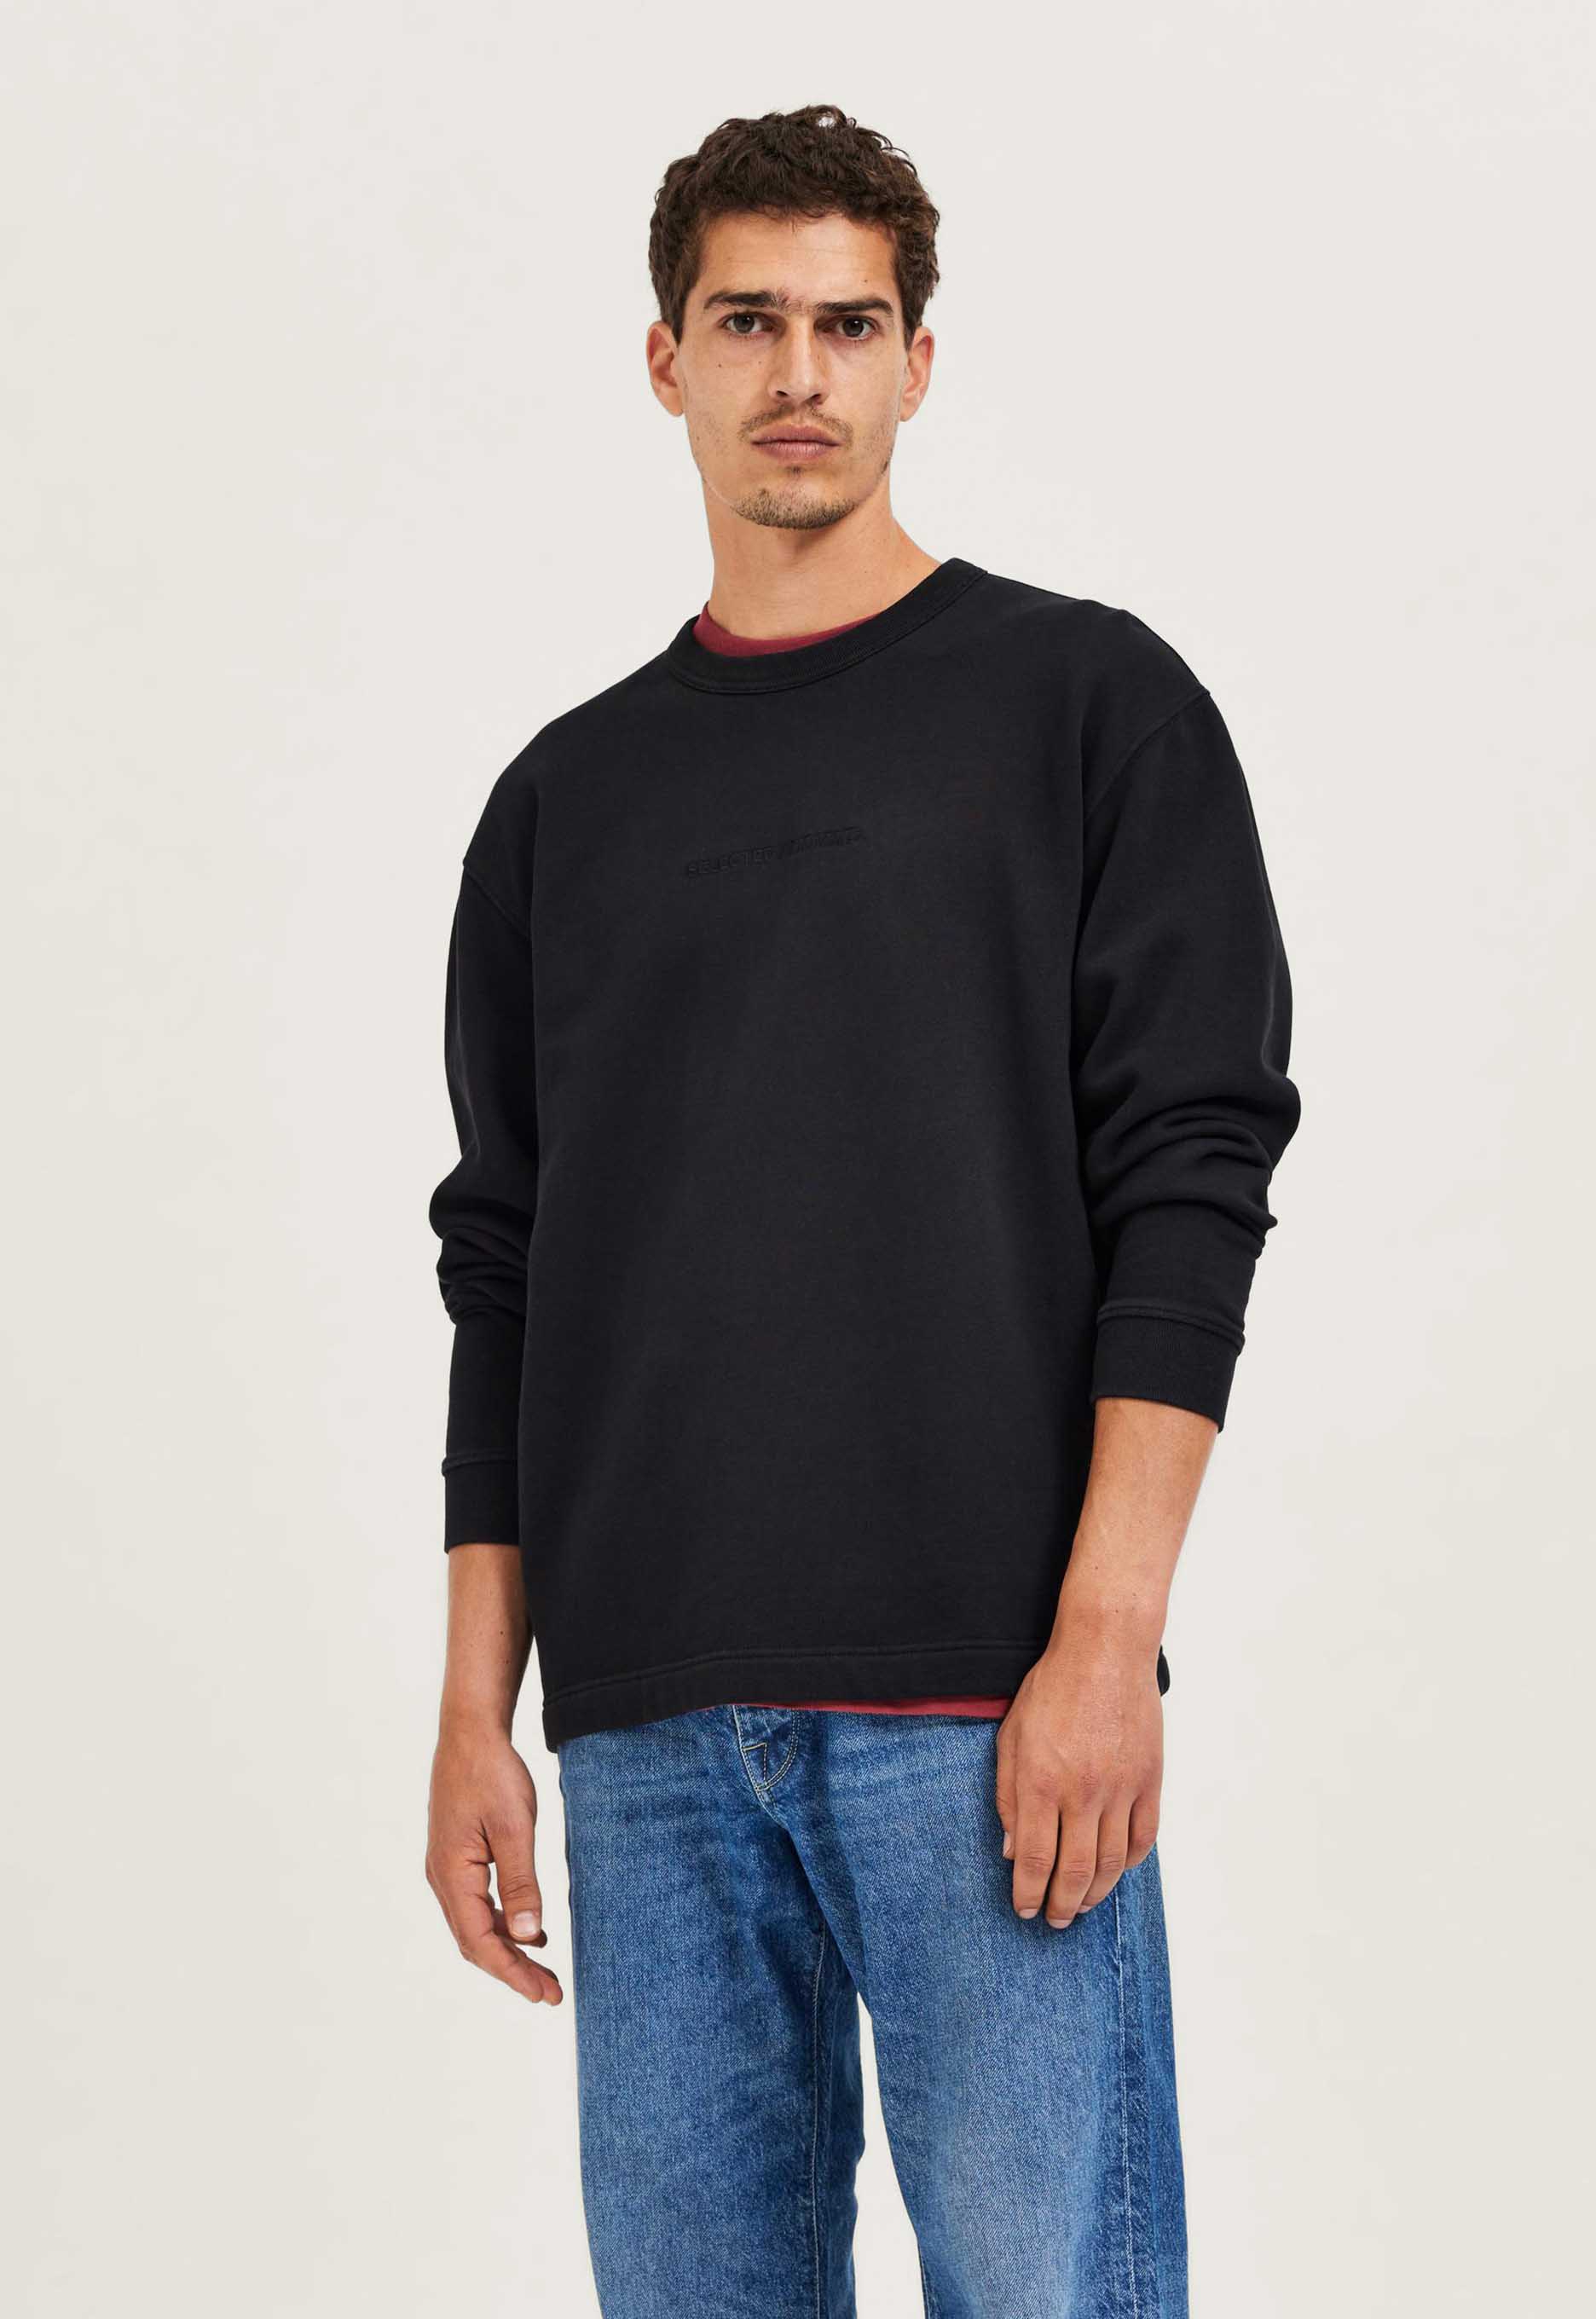 Selected Homme Relax Holger Crew Sweater